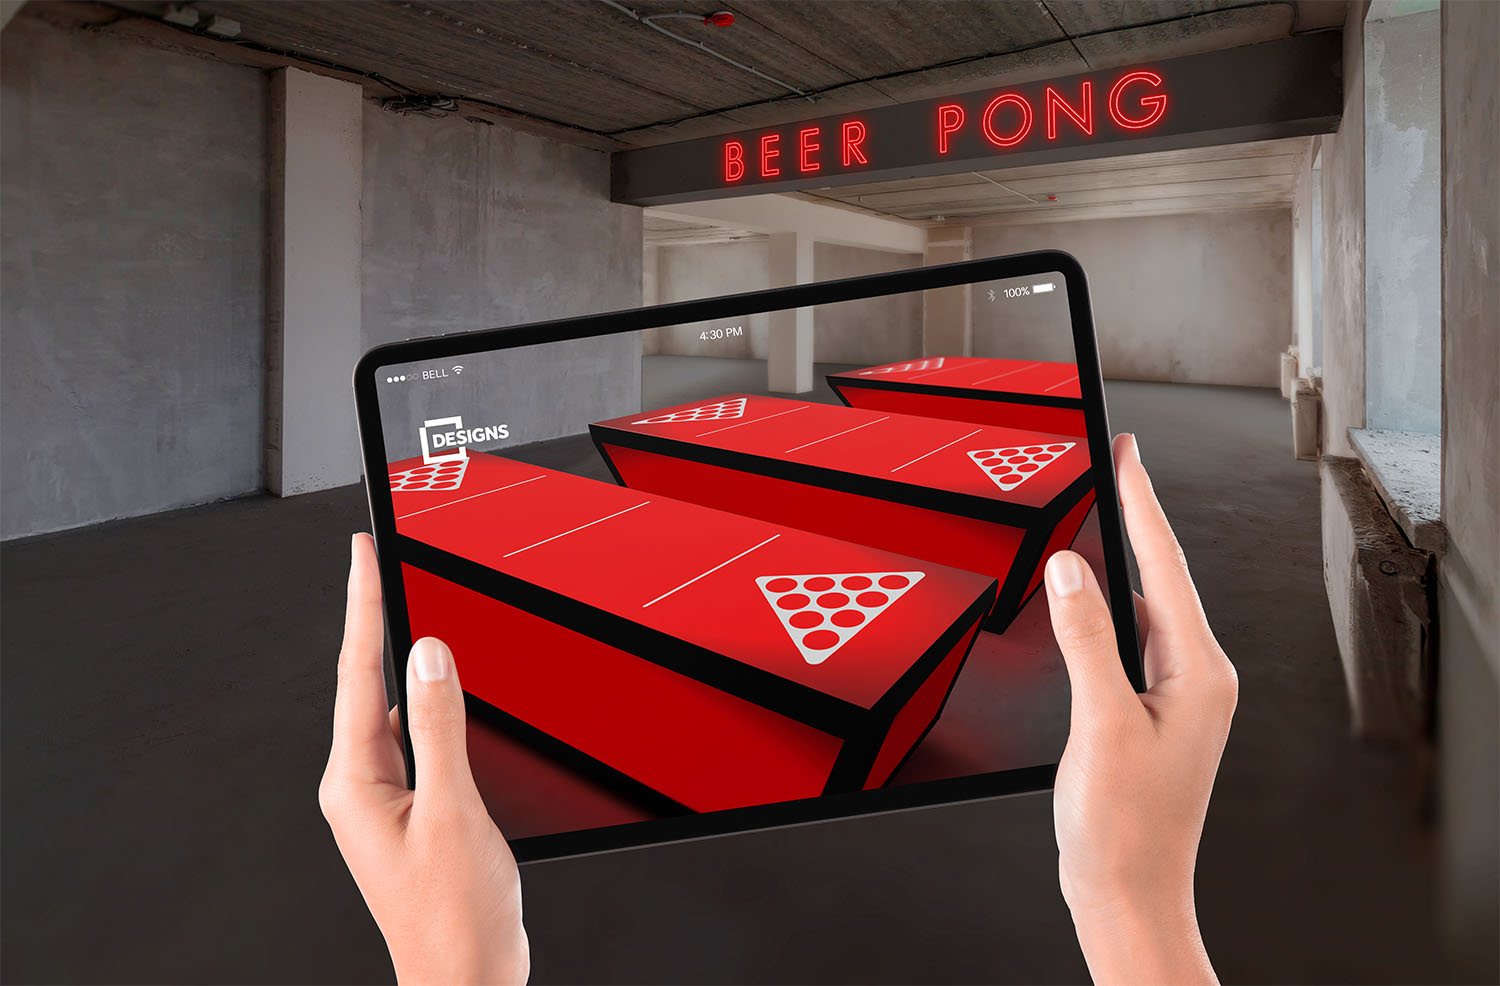 IPad showing bespoke ping pong tables using augmented reality in an empty building.